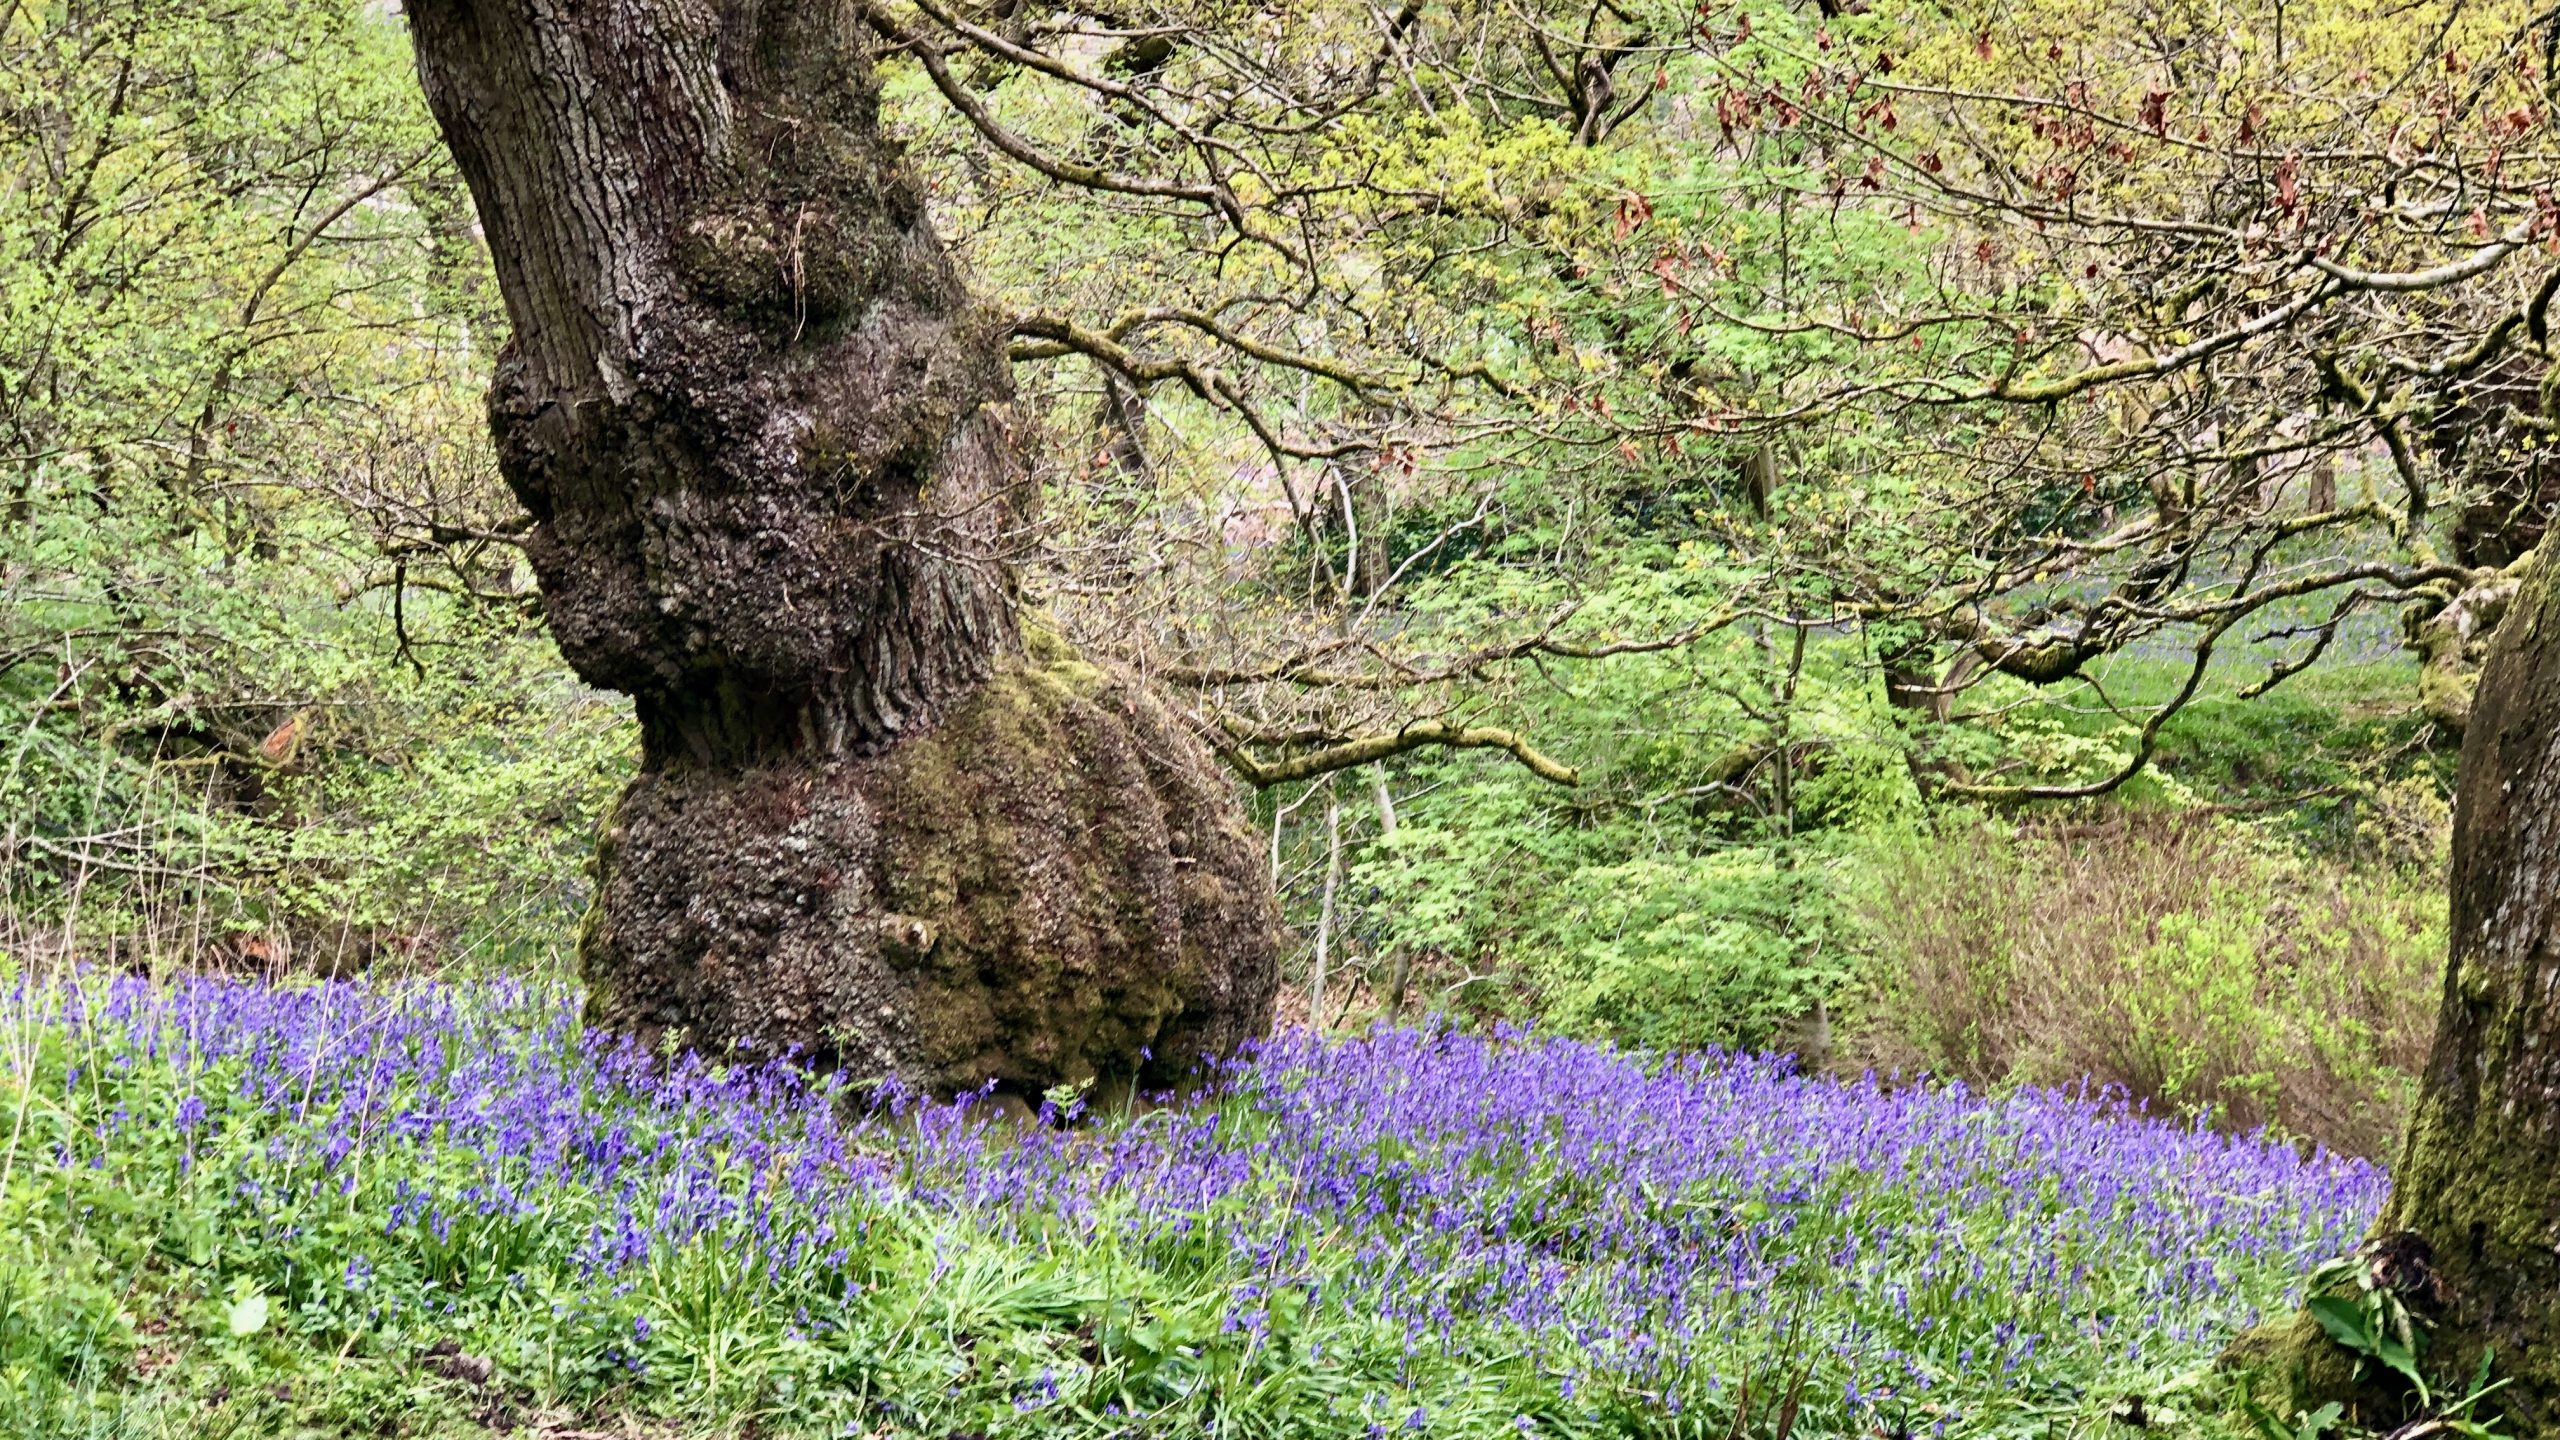 Bluebells, Burrs, and the Oak Tree